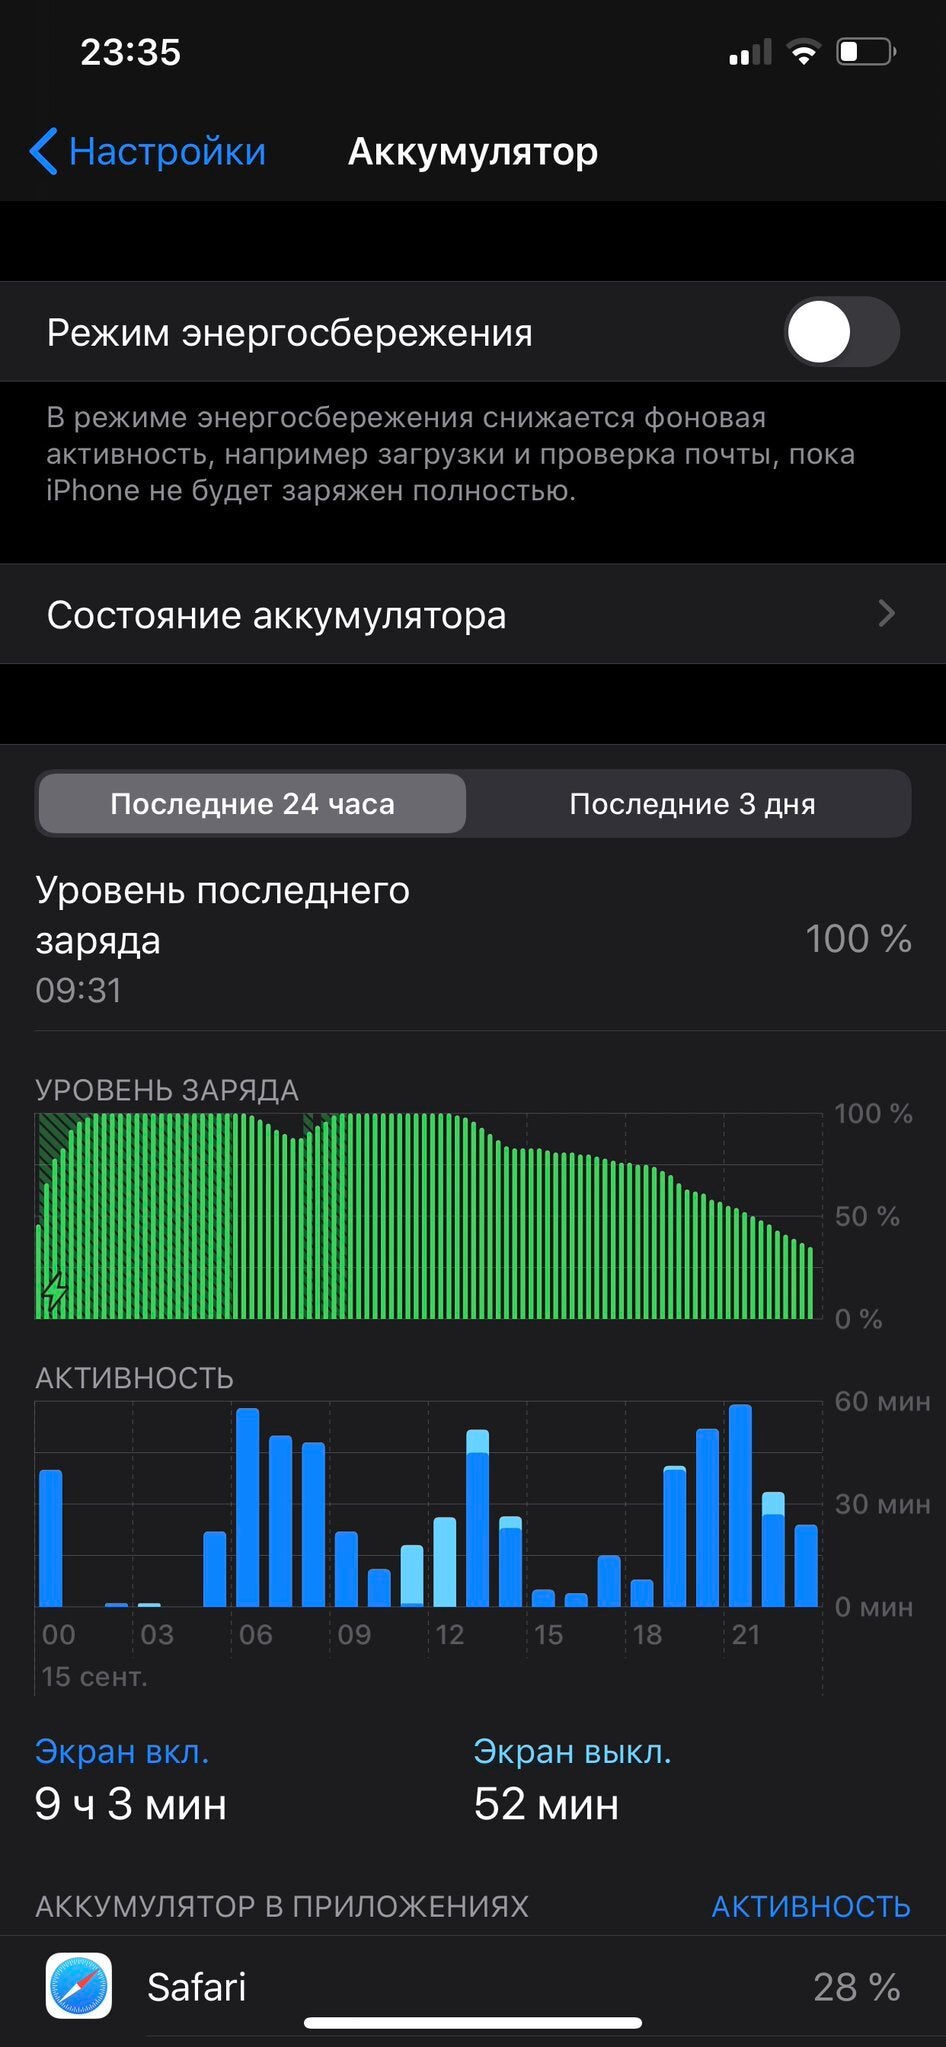 This iPhone 11 Pro Max review graph tells all about its record battery life